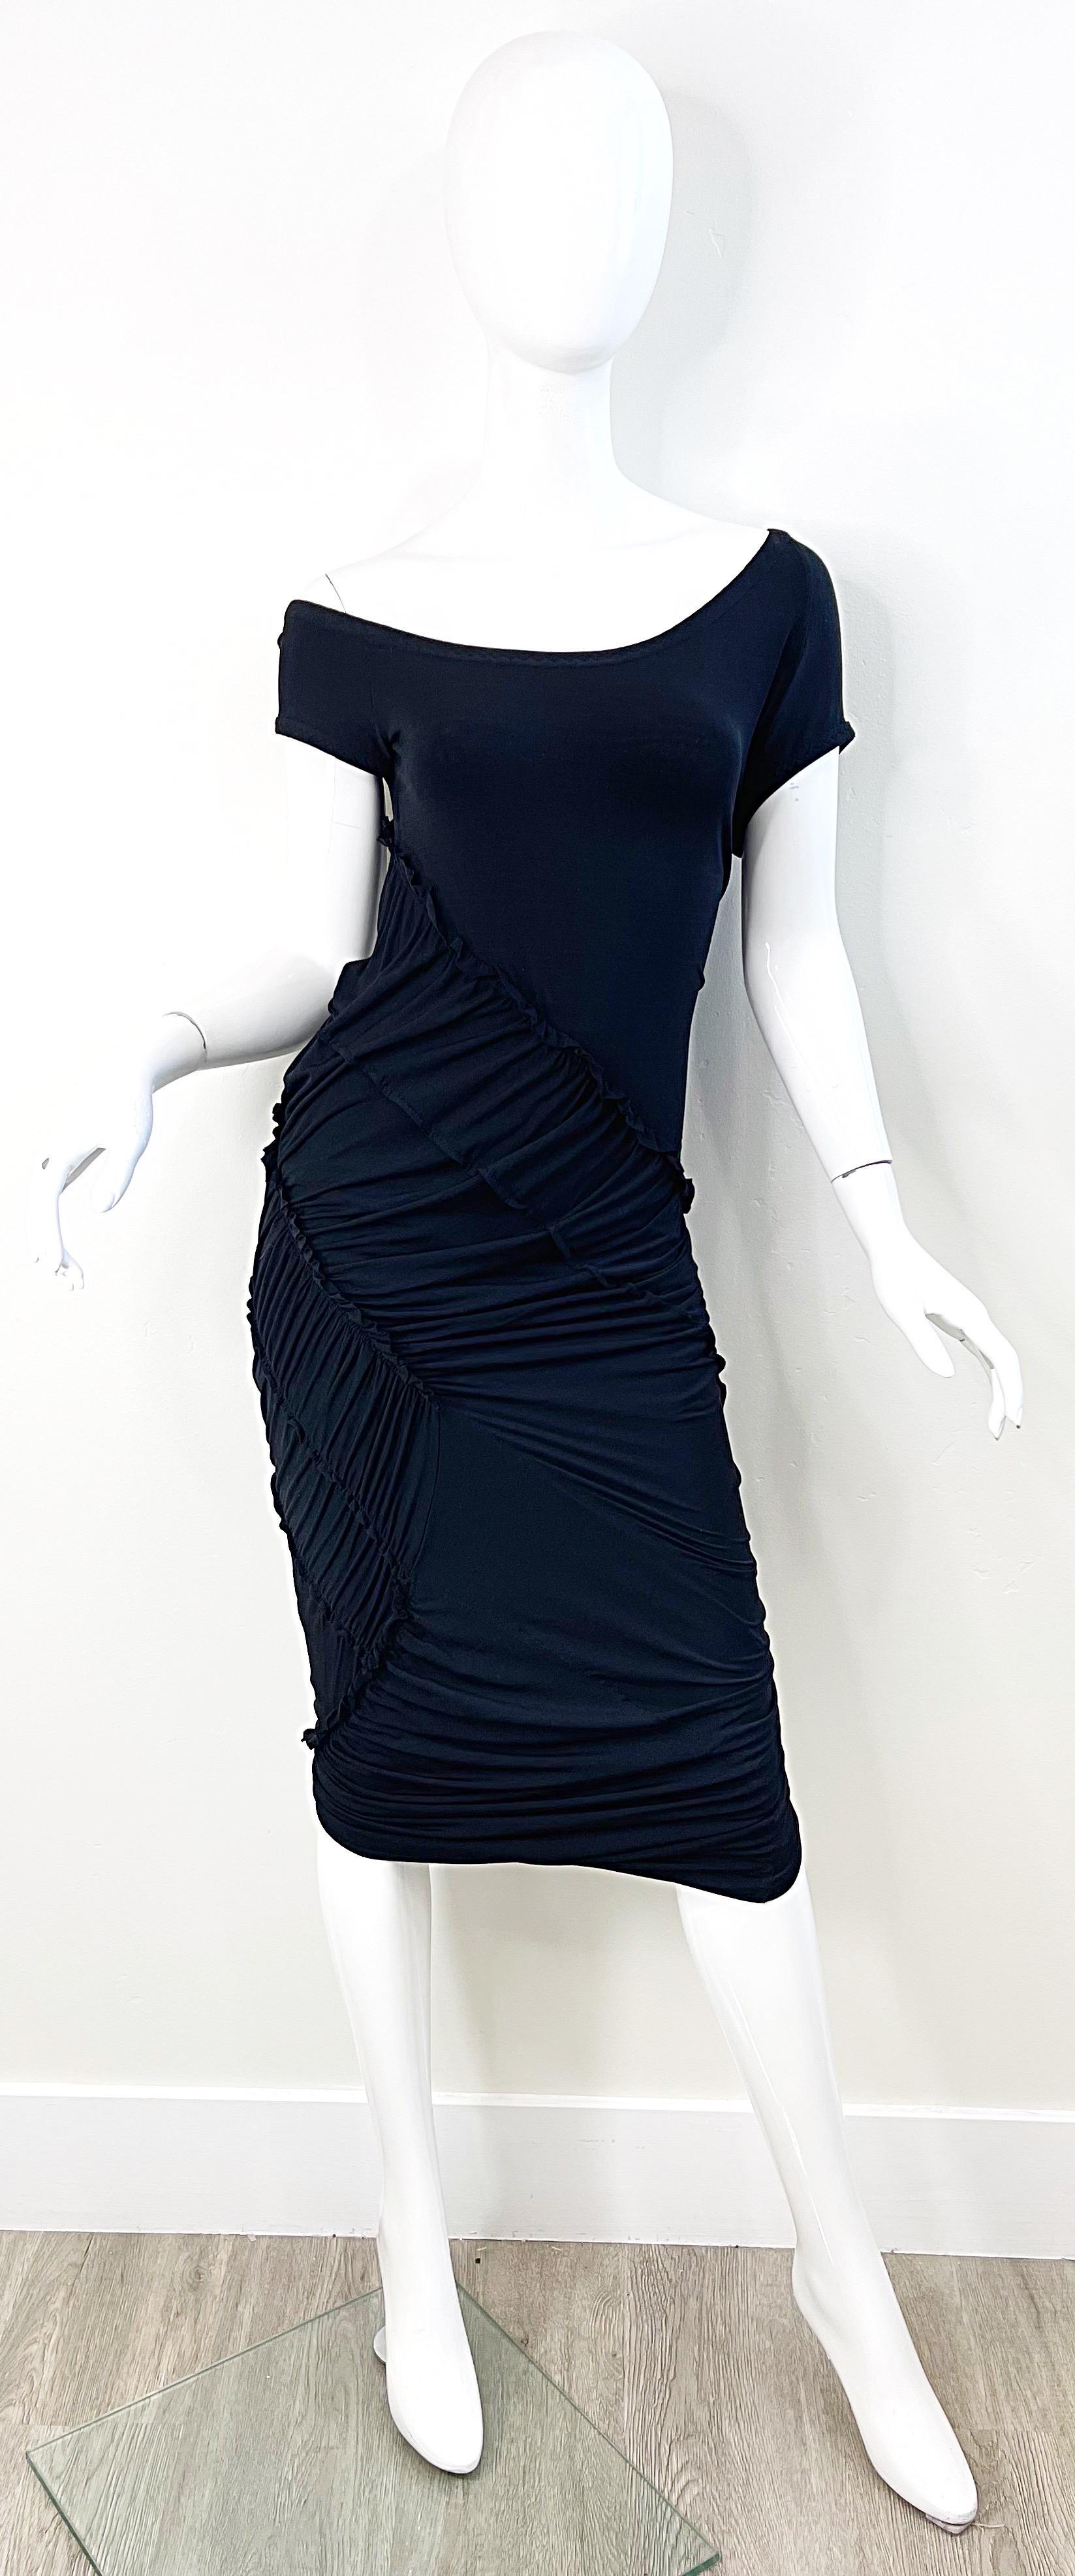 Flattering DONNA KARAN Collection black vintage ruched off-shoulder silk/rayon/spandex  jersey dress ! Sits off one shoulder. Simply slip on, and it stretches to fit. The perfect timeless little black dress from the early 2000s.
In great unworn